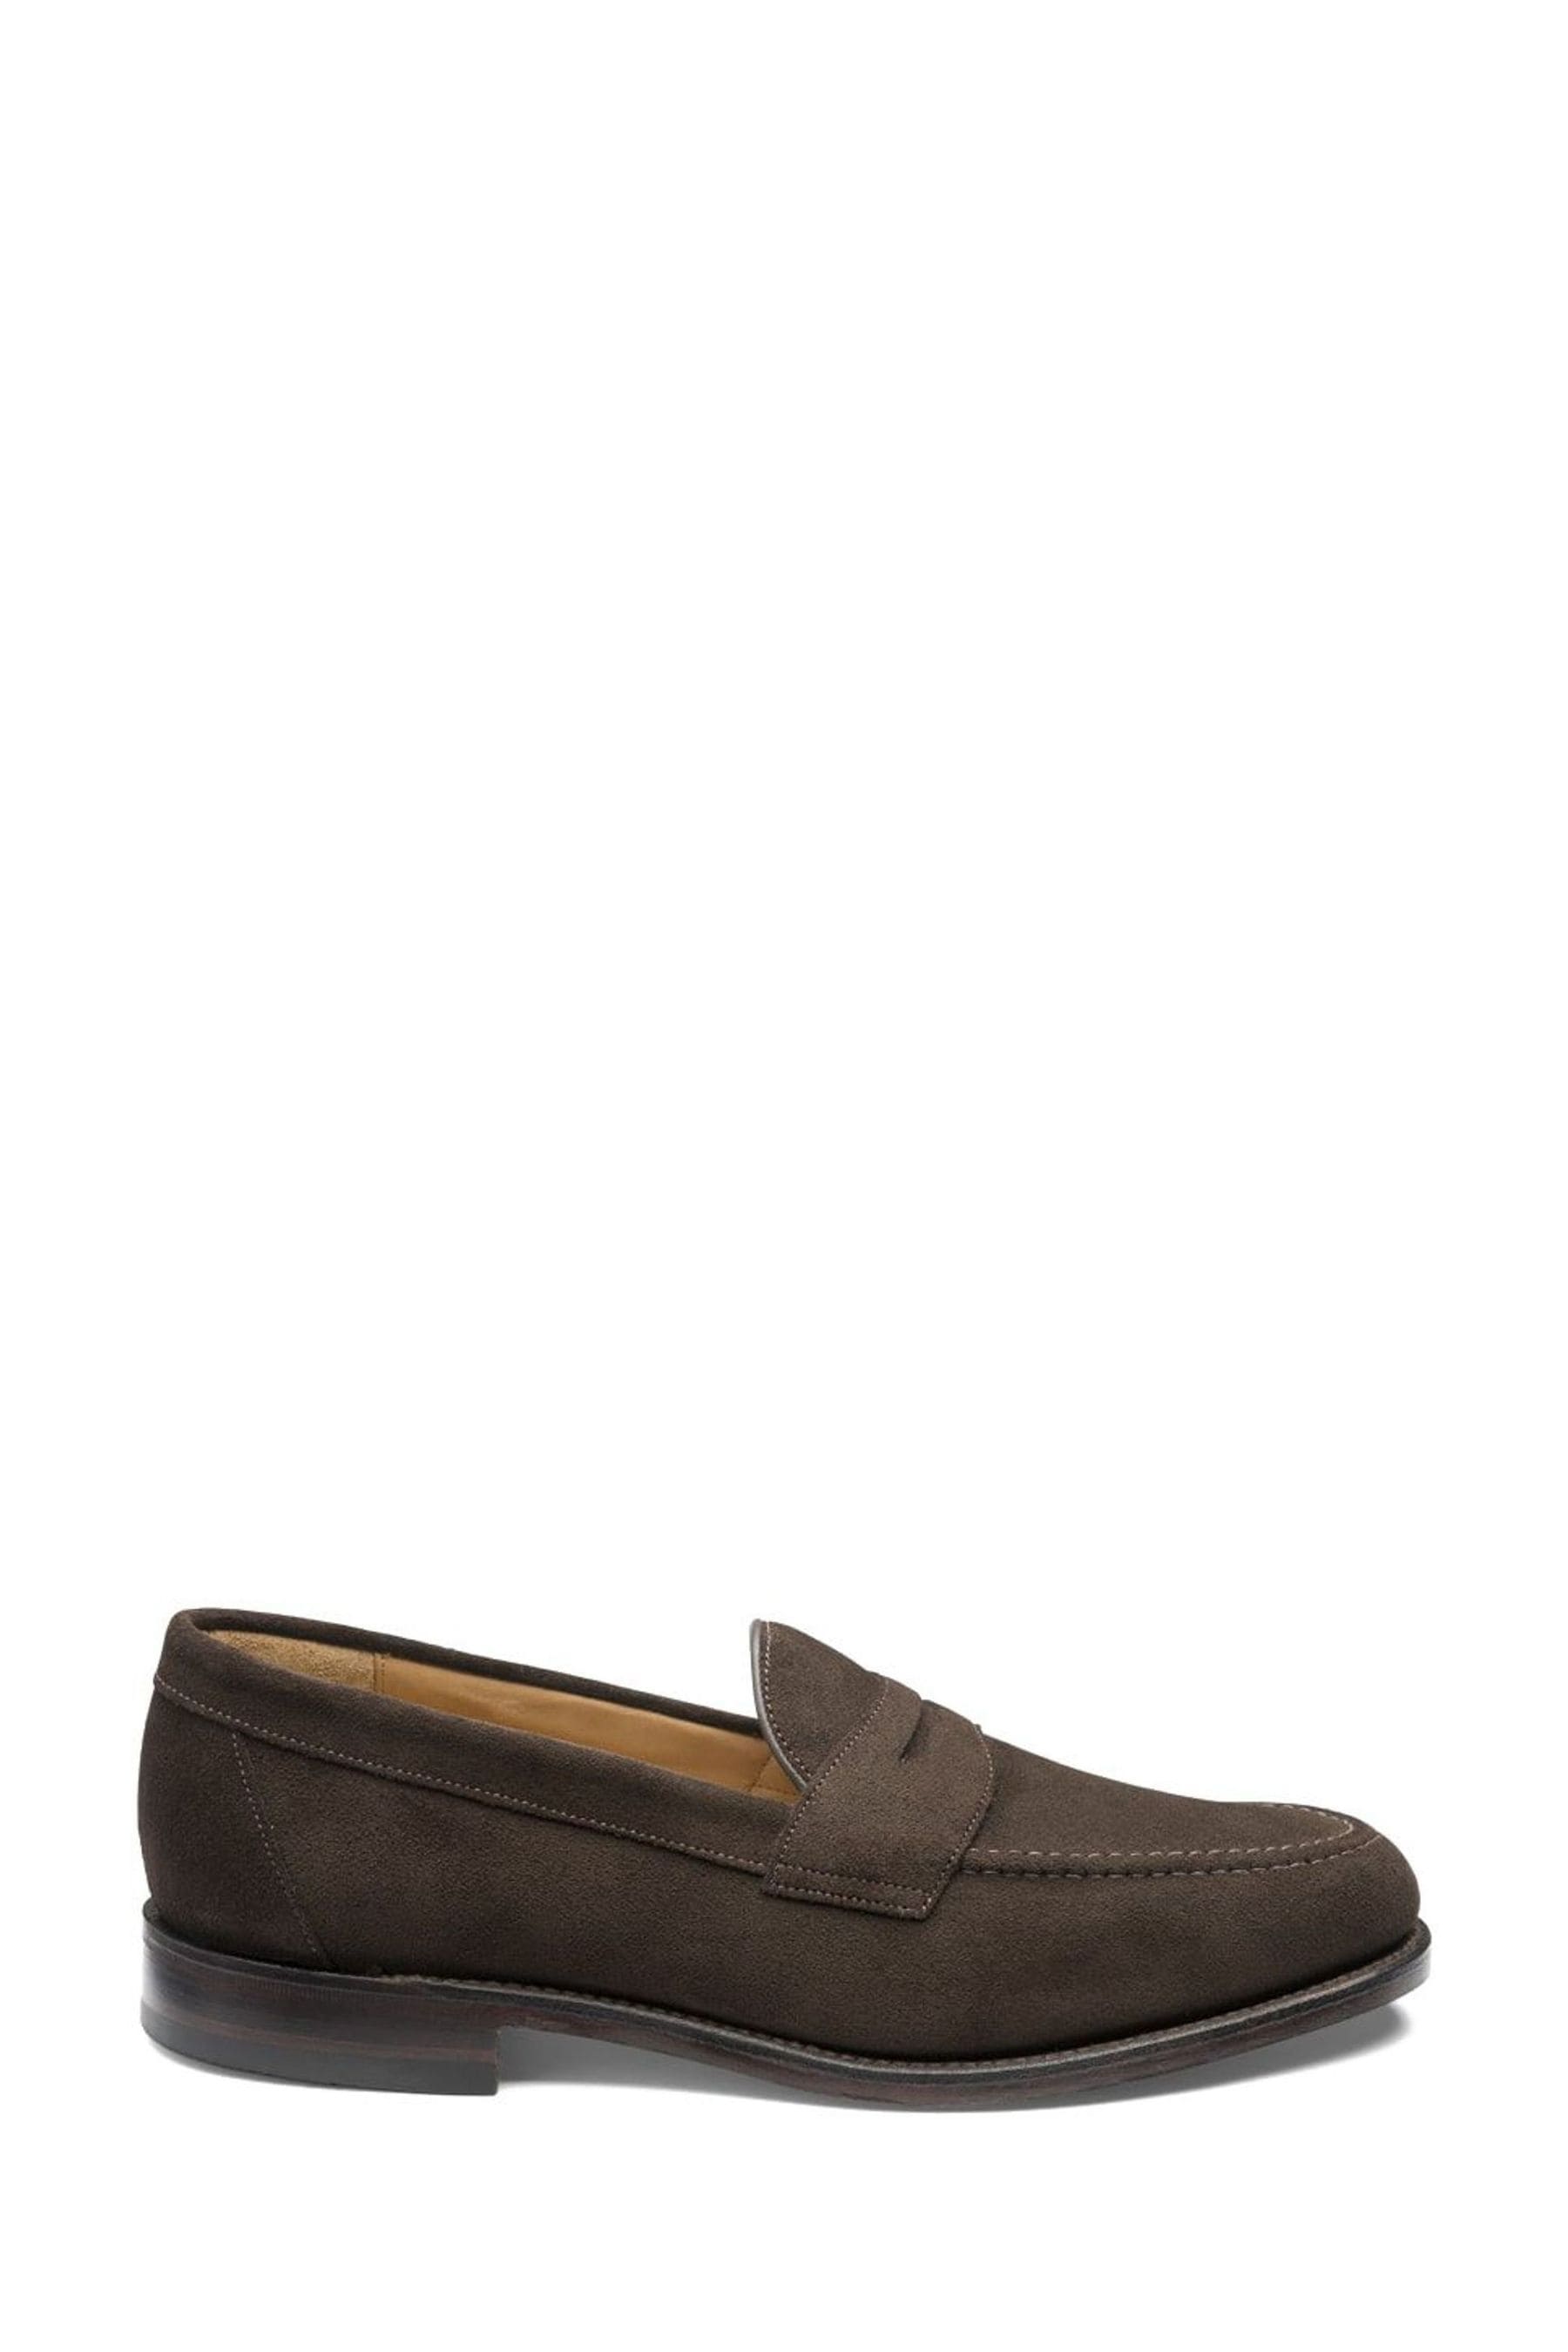 Buy Loake Imperial Polished Apron Penny Loafers from the Next UK online ...